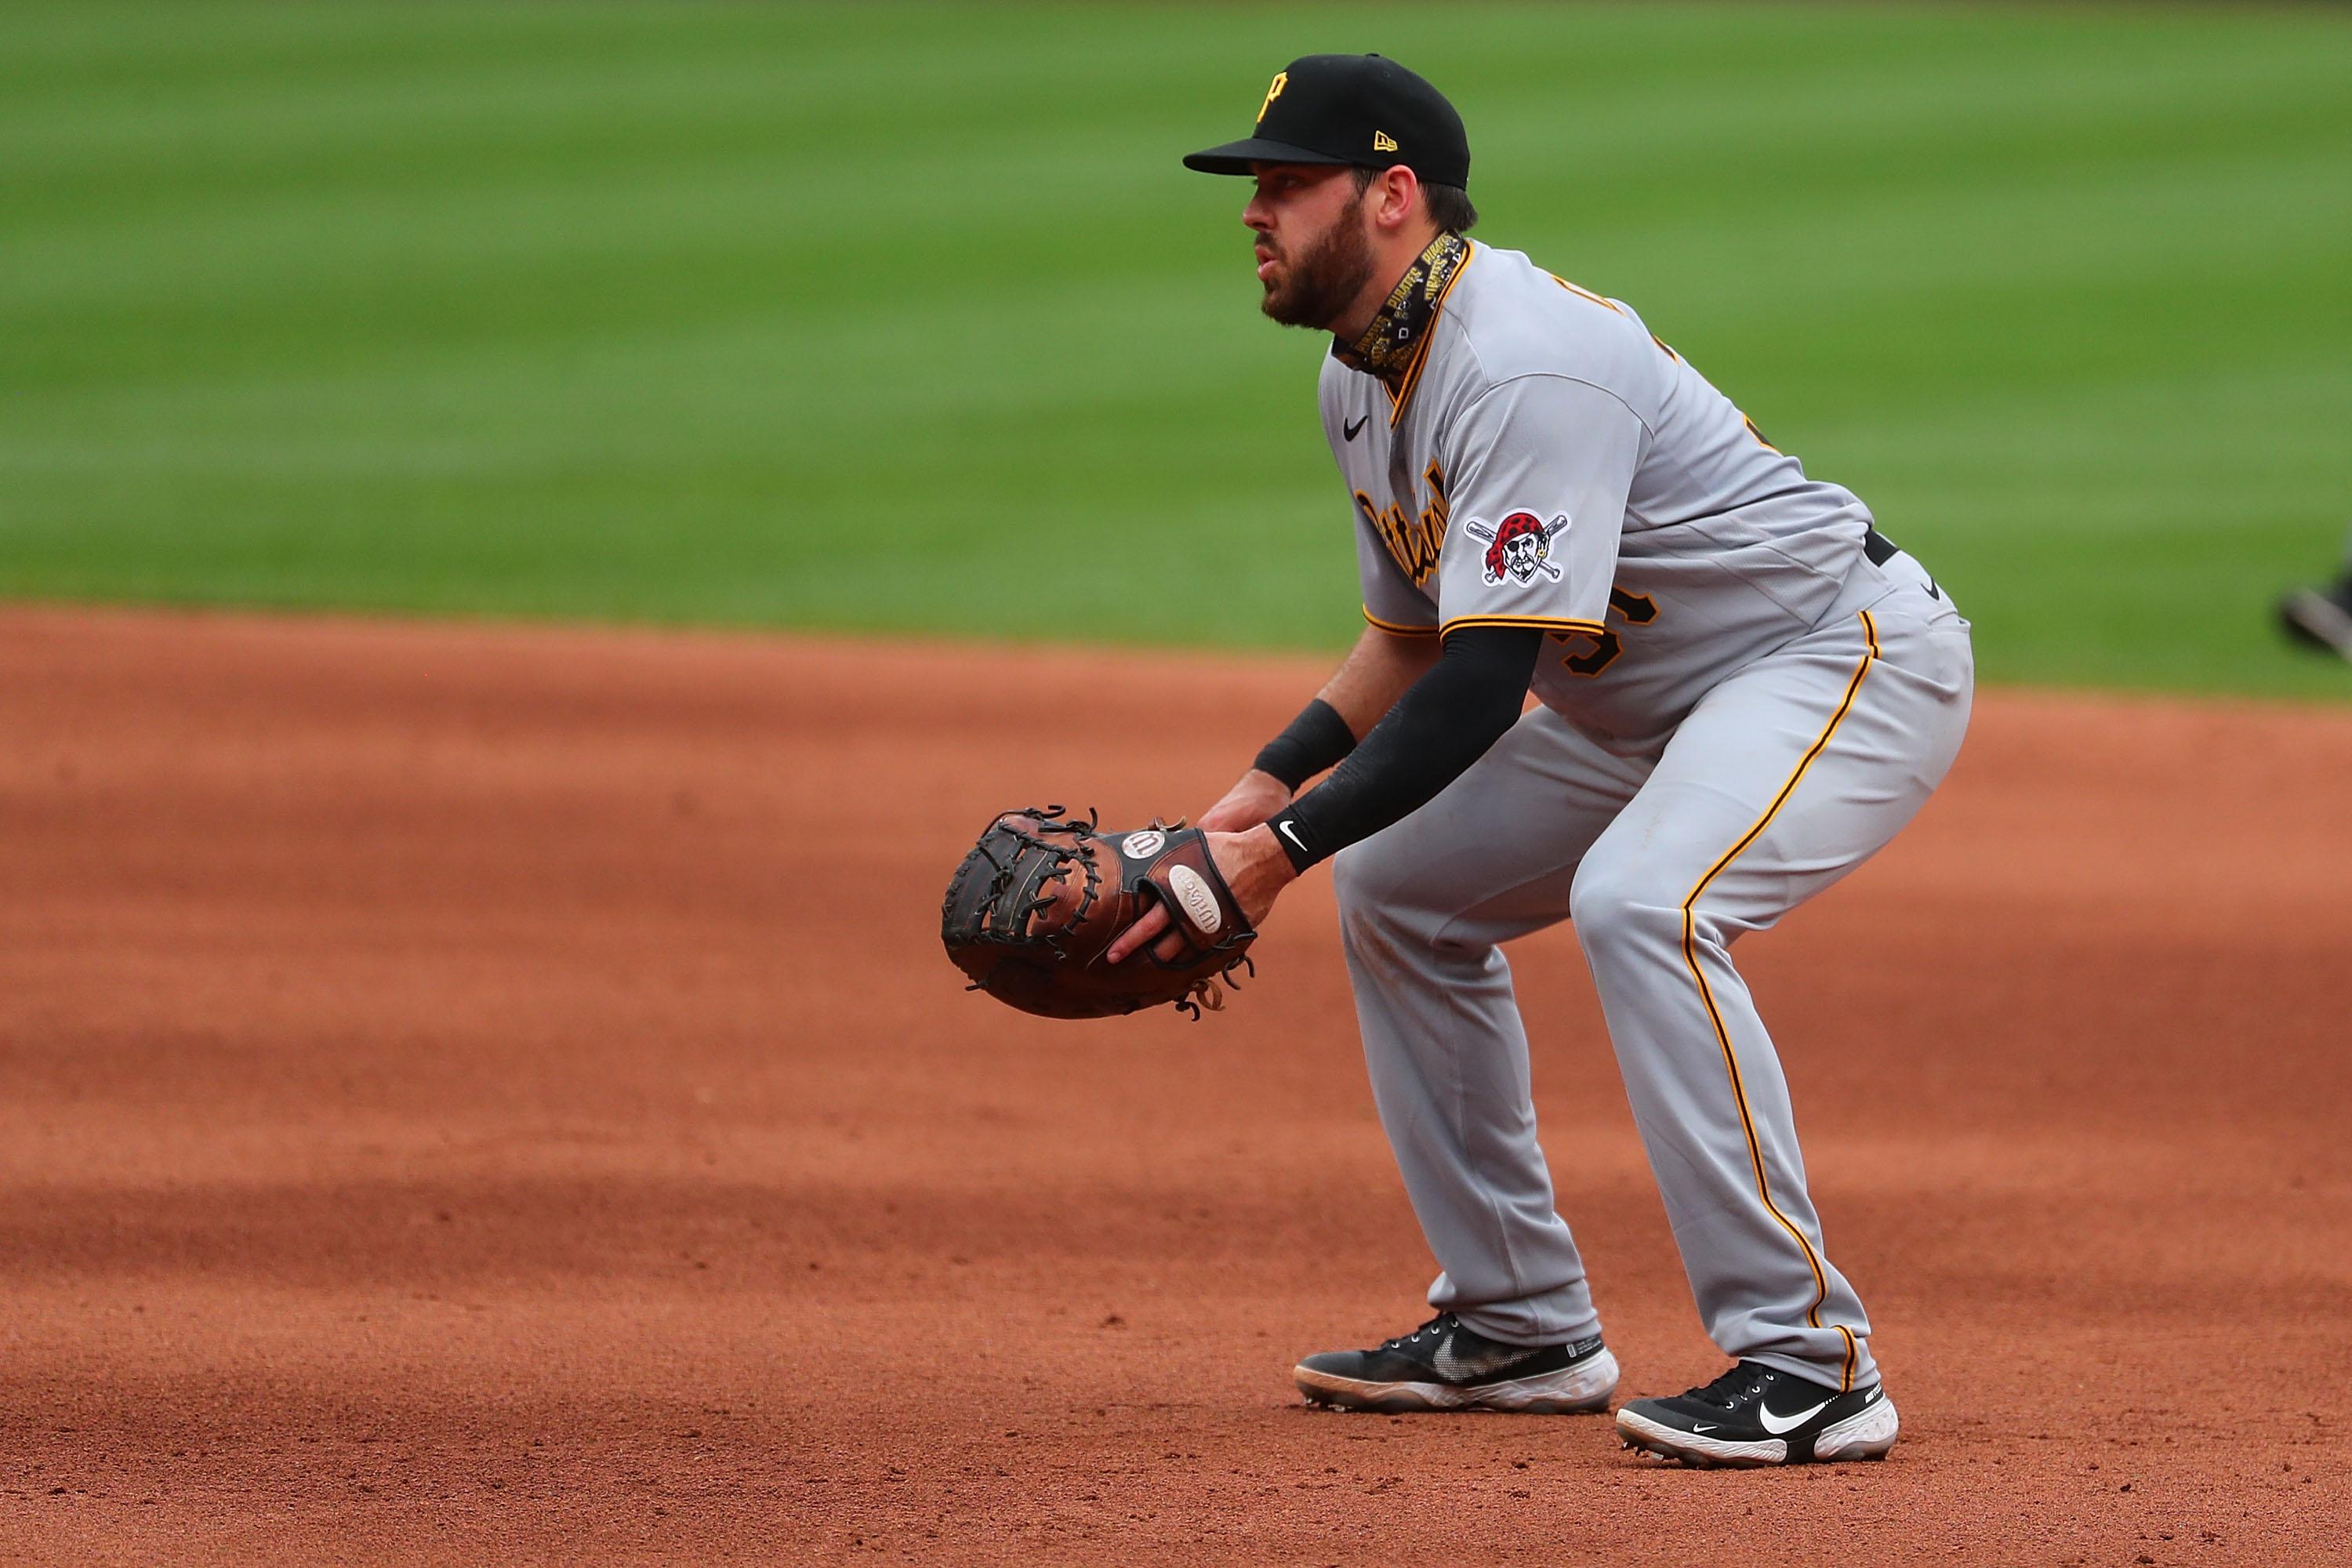 A player in a Pirates uniform plays first base.